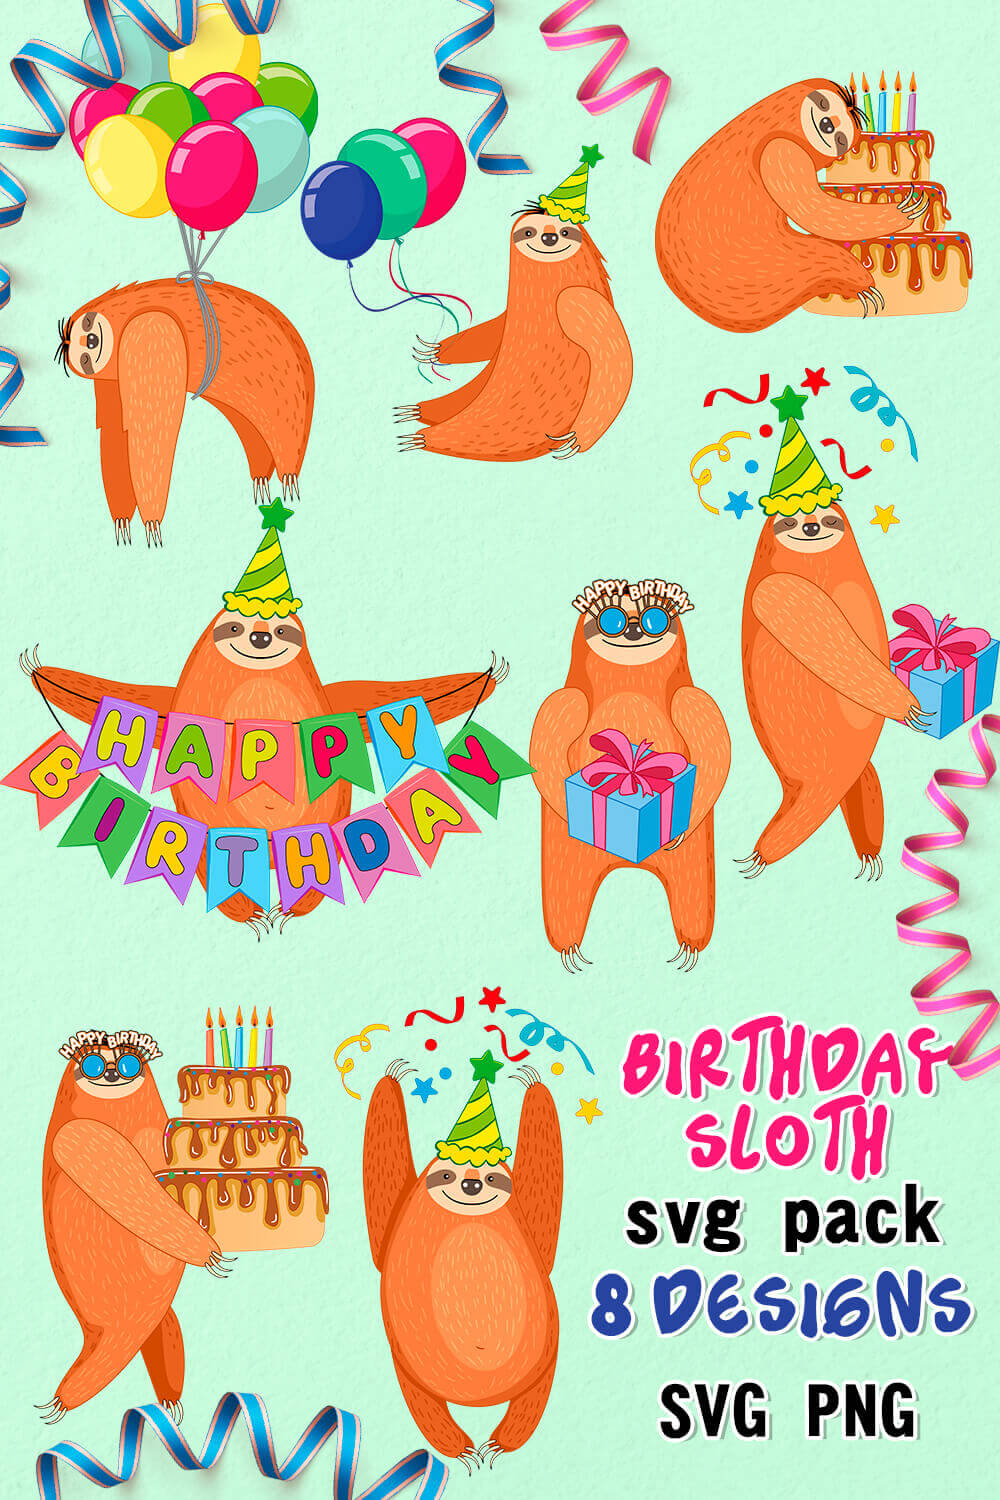 Birthday sloth svg pack and designs.